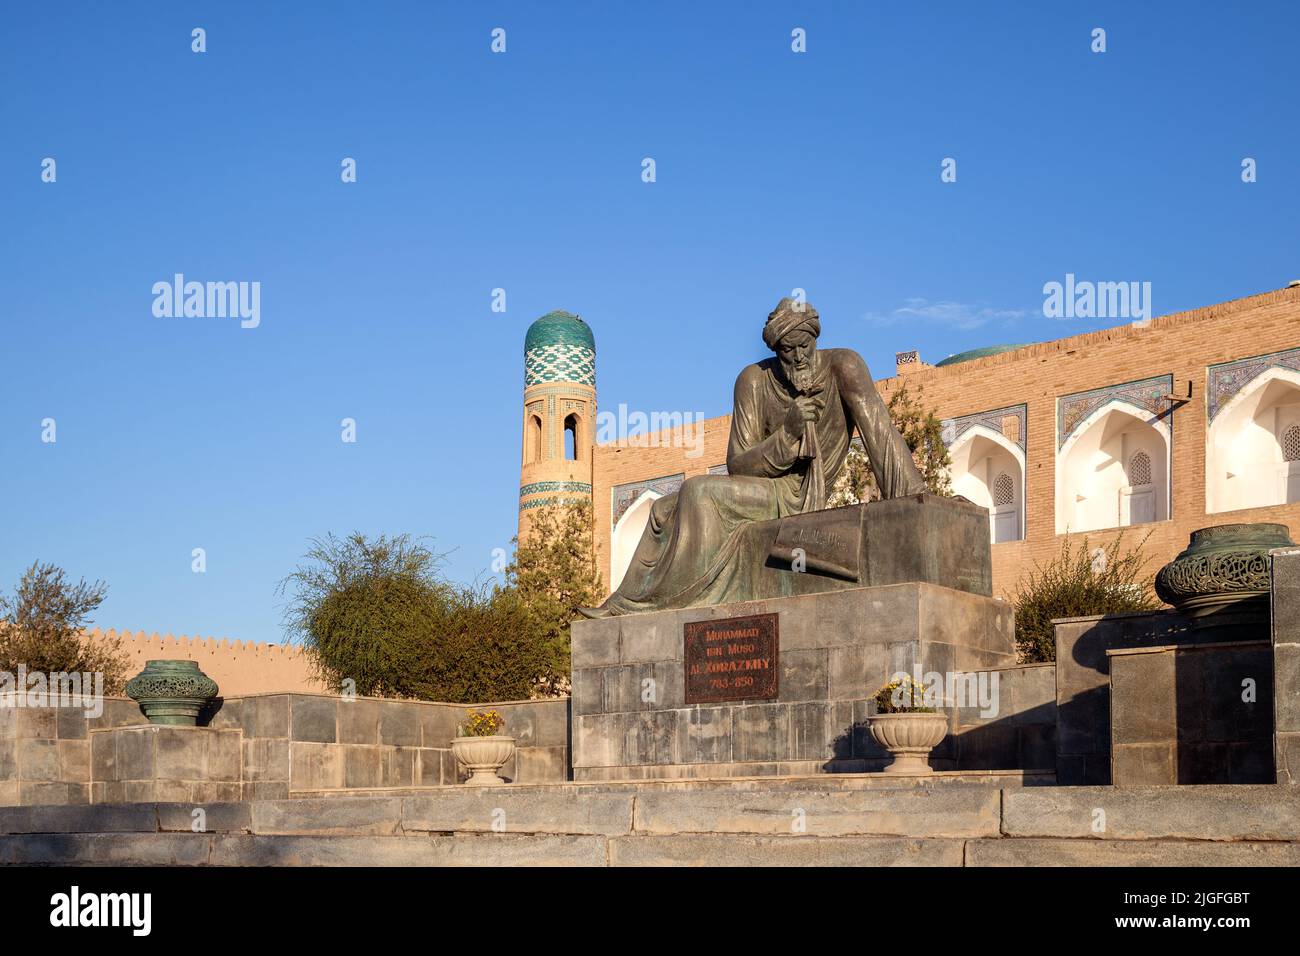 Khiva, Uzbekistan - October, 2016: Monument to outstanding mathematician of Middle Ages Muhammad ibn Musa al-Khwarizmi installed at Western gate of It Stock Photo